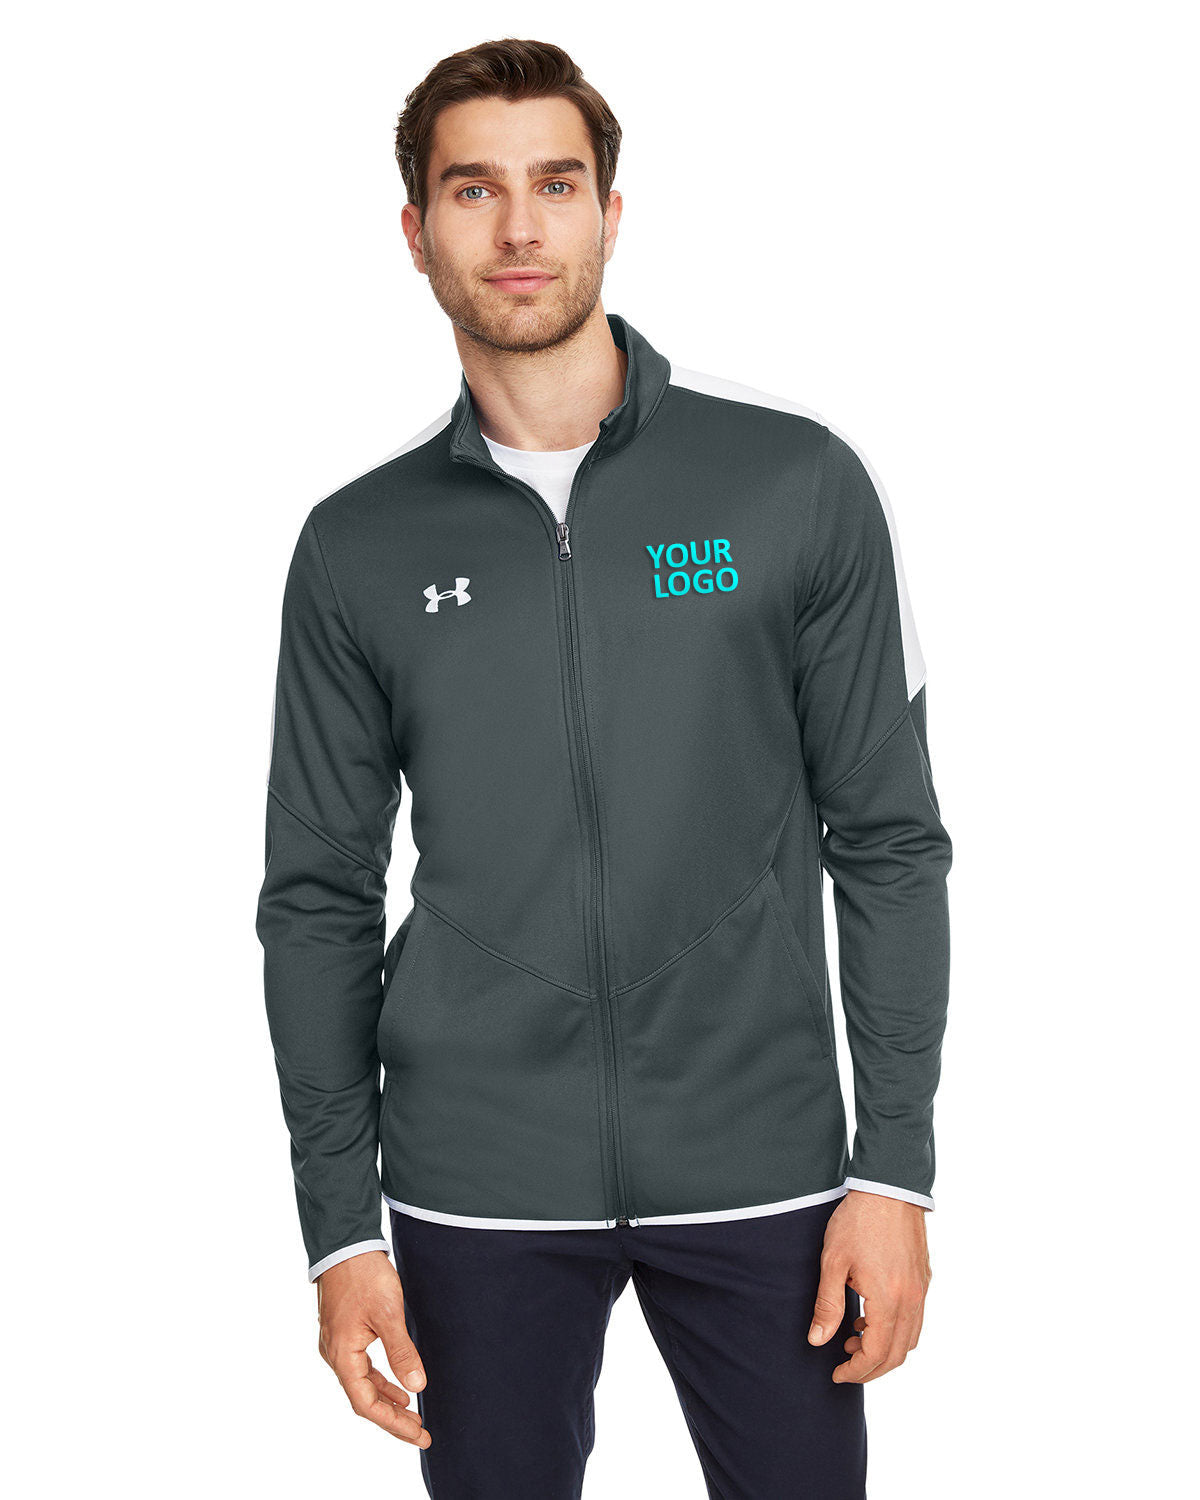 Under Armour Men's Rival Knit Jacket, Stealth Gray